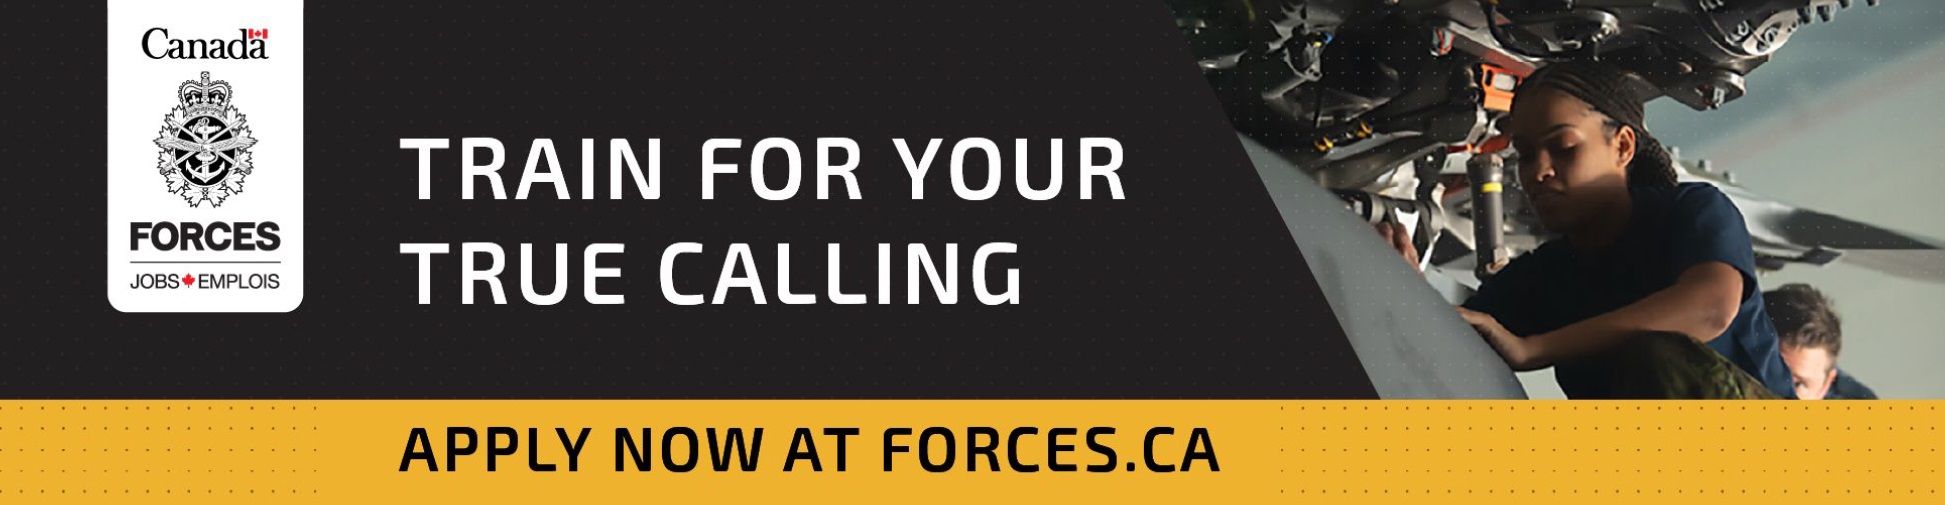 Square banner image of Corporal Caylen Dorrington fixing aircraft with the text Canada Forces jobs, Train for your true calling, and Apply now at Forces.ca